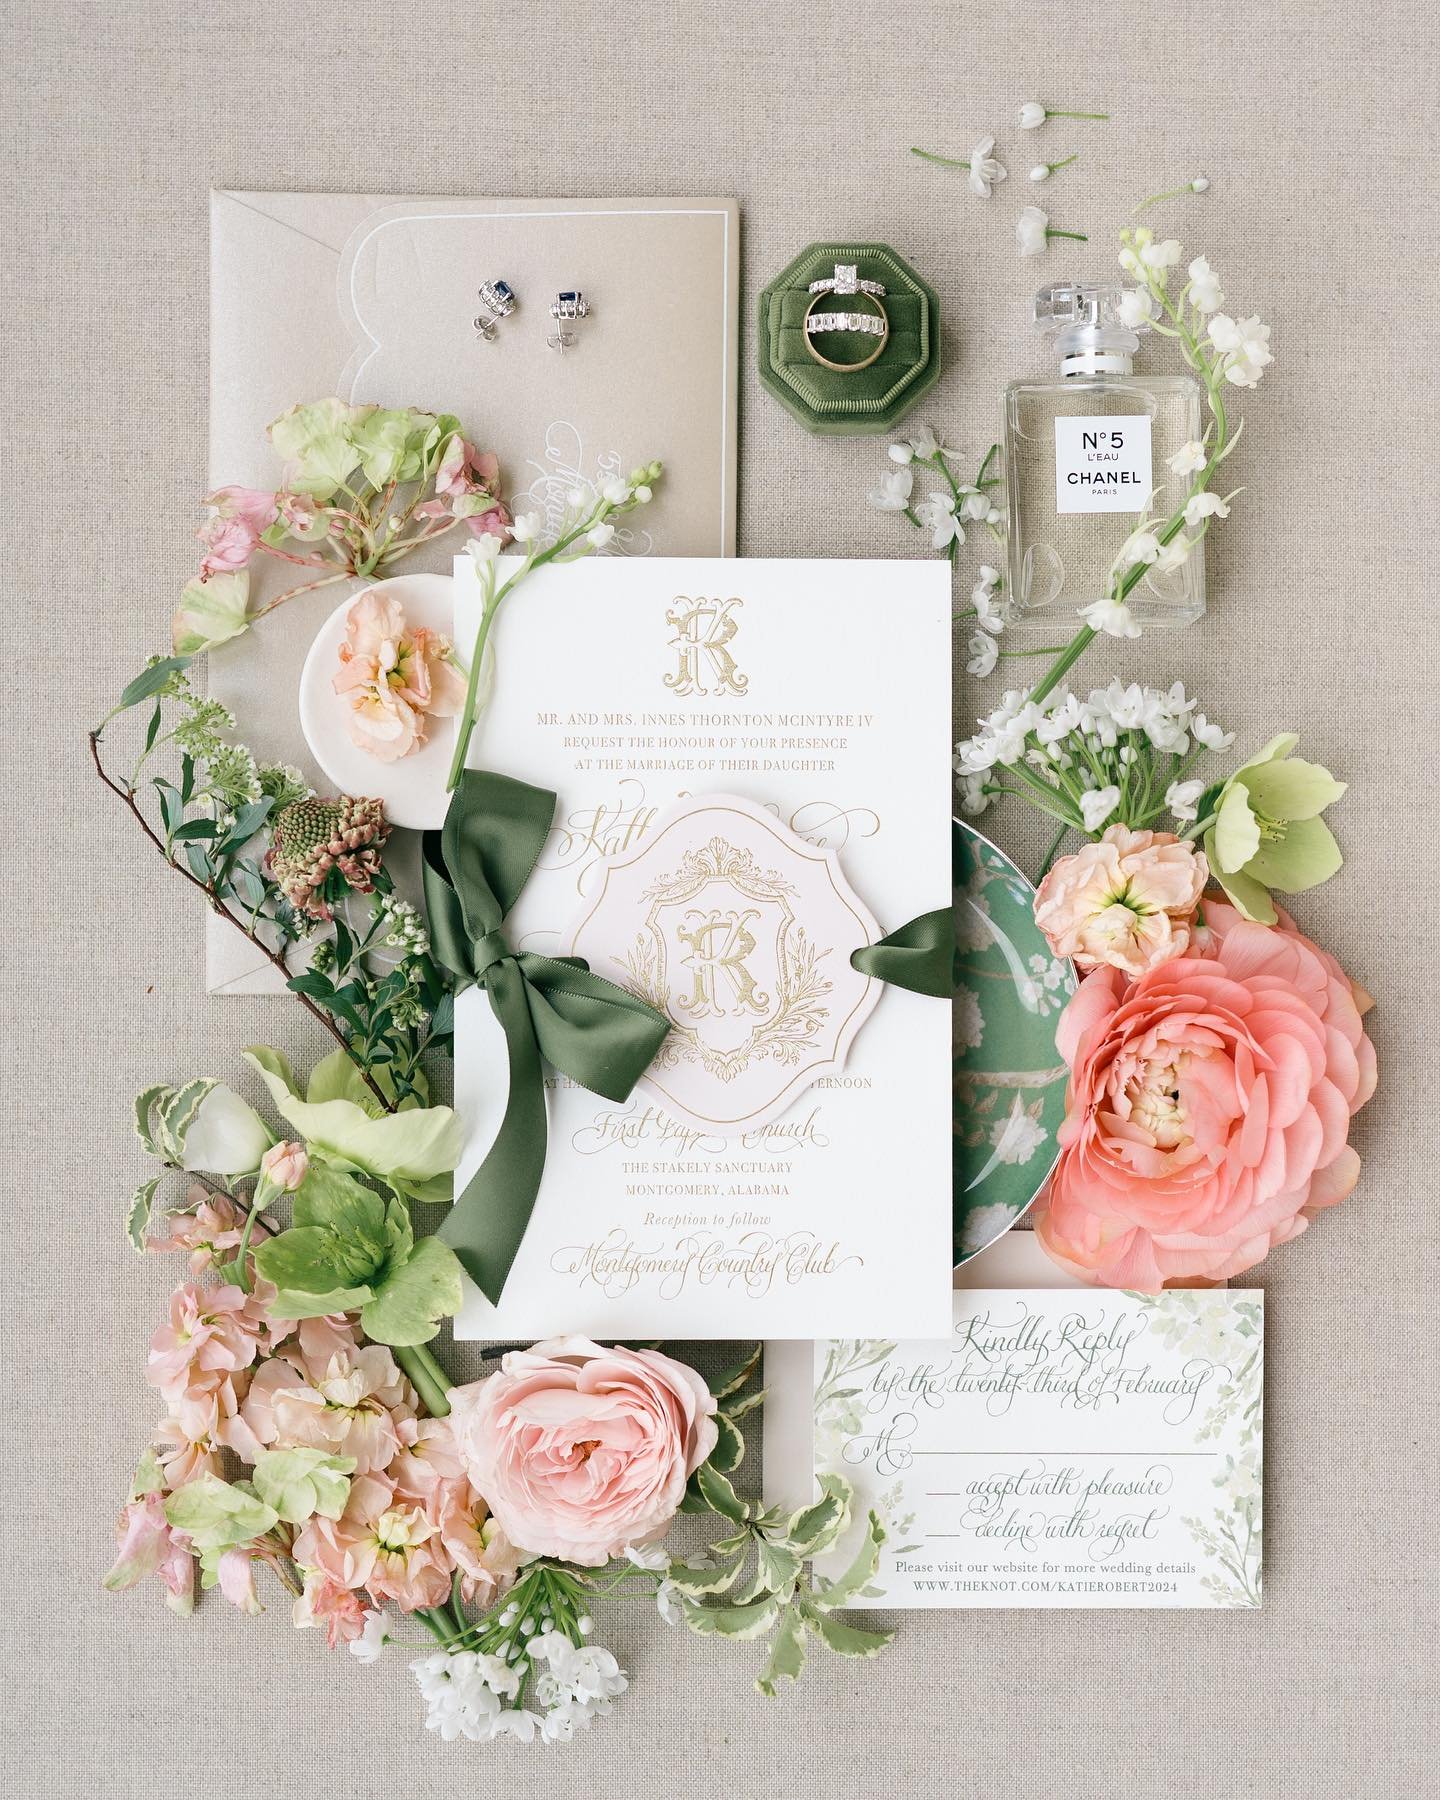 We are swooning over Katie &amp; Robert&rsquo;s invitation suite✨ Swipe to see all the beautiful, intricate details up close! We can&rsquo;t wait to share more from this special day!

Planning @southernposies 
Photography @haintbluecollective 

#kara